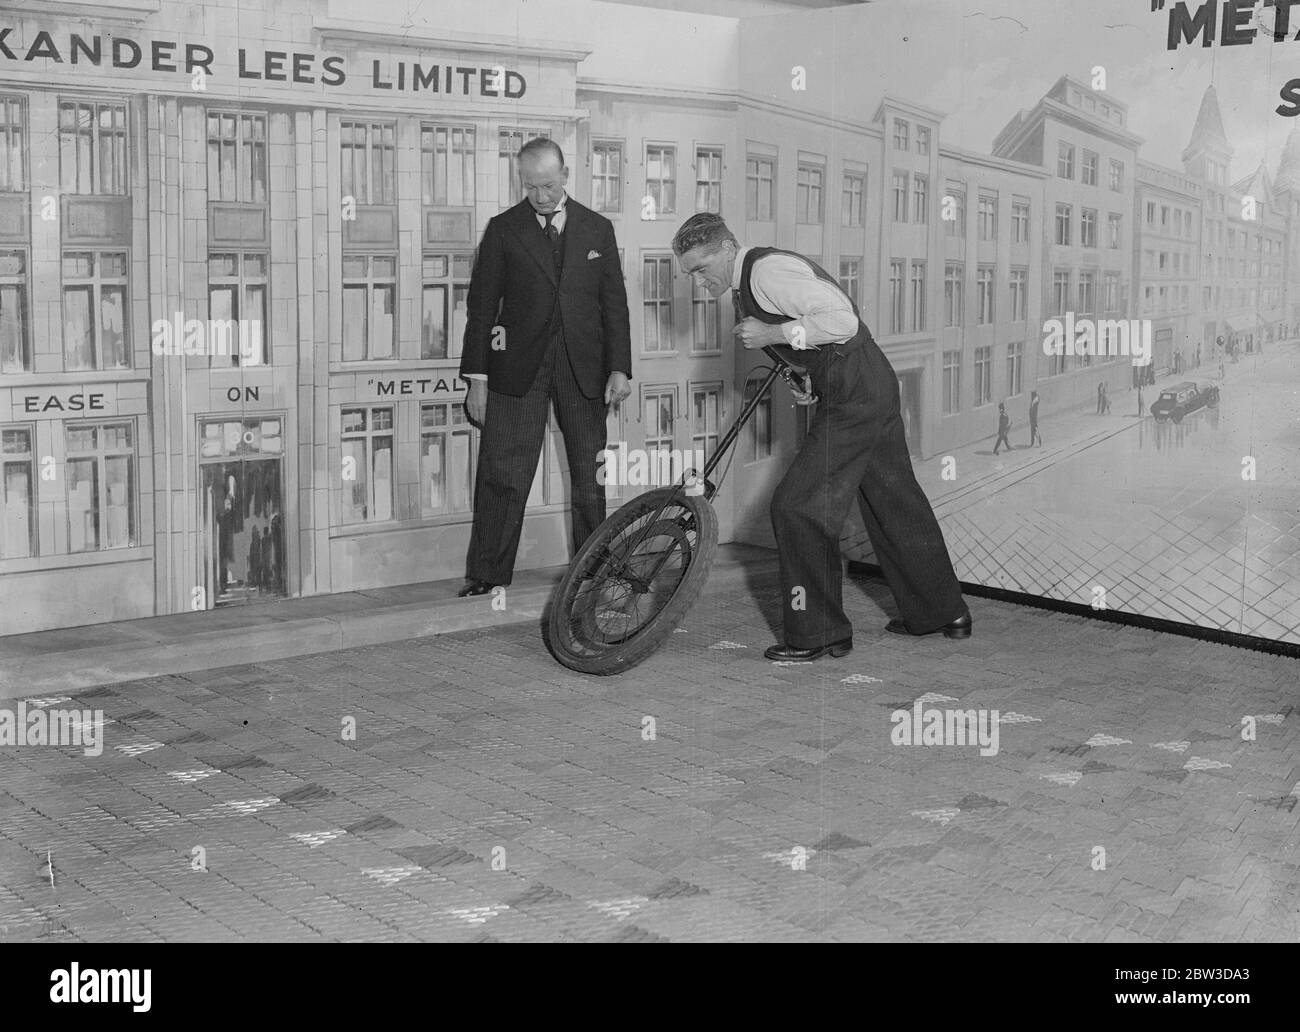 Skidproof metal road surface demonstrated at London exhibition . A new metal road surface being demonstrated . The surface is said to be absolutely skidproof . 18 November 1935 Stock Photo